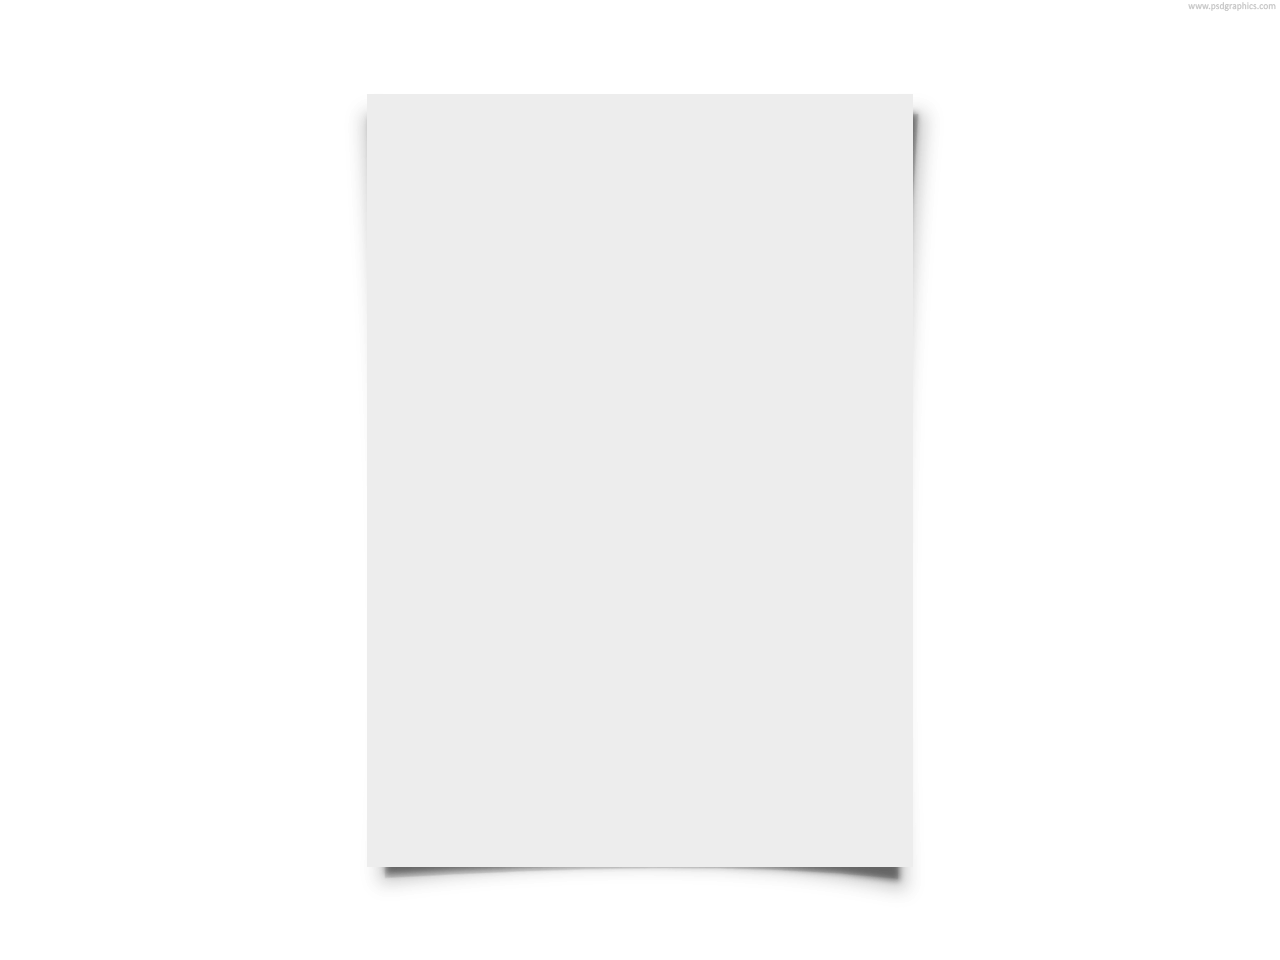 Blank white paper (PNG) - Textures & Backgrounds